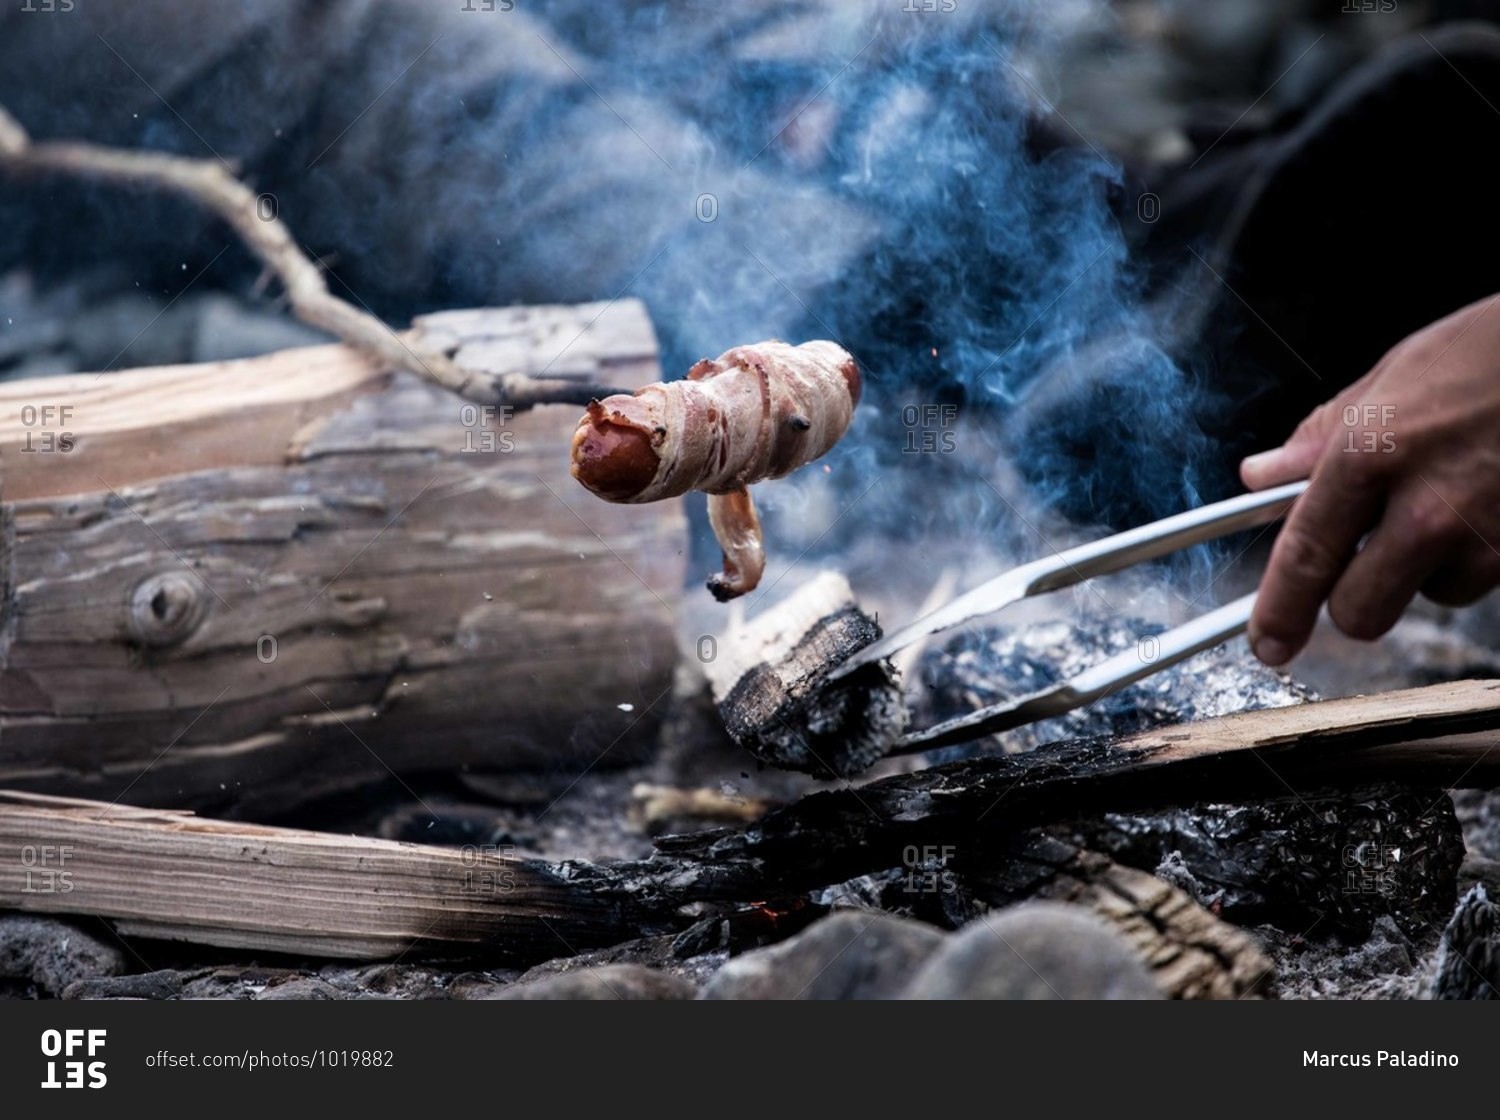 Hot dog wrapped in bacon being cooked over a campfire